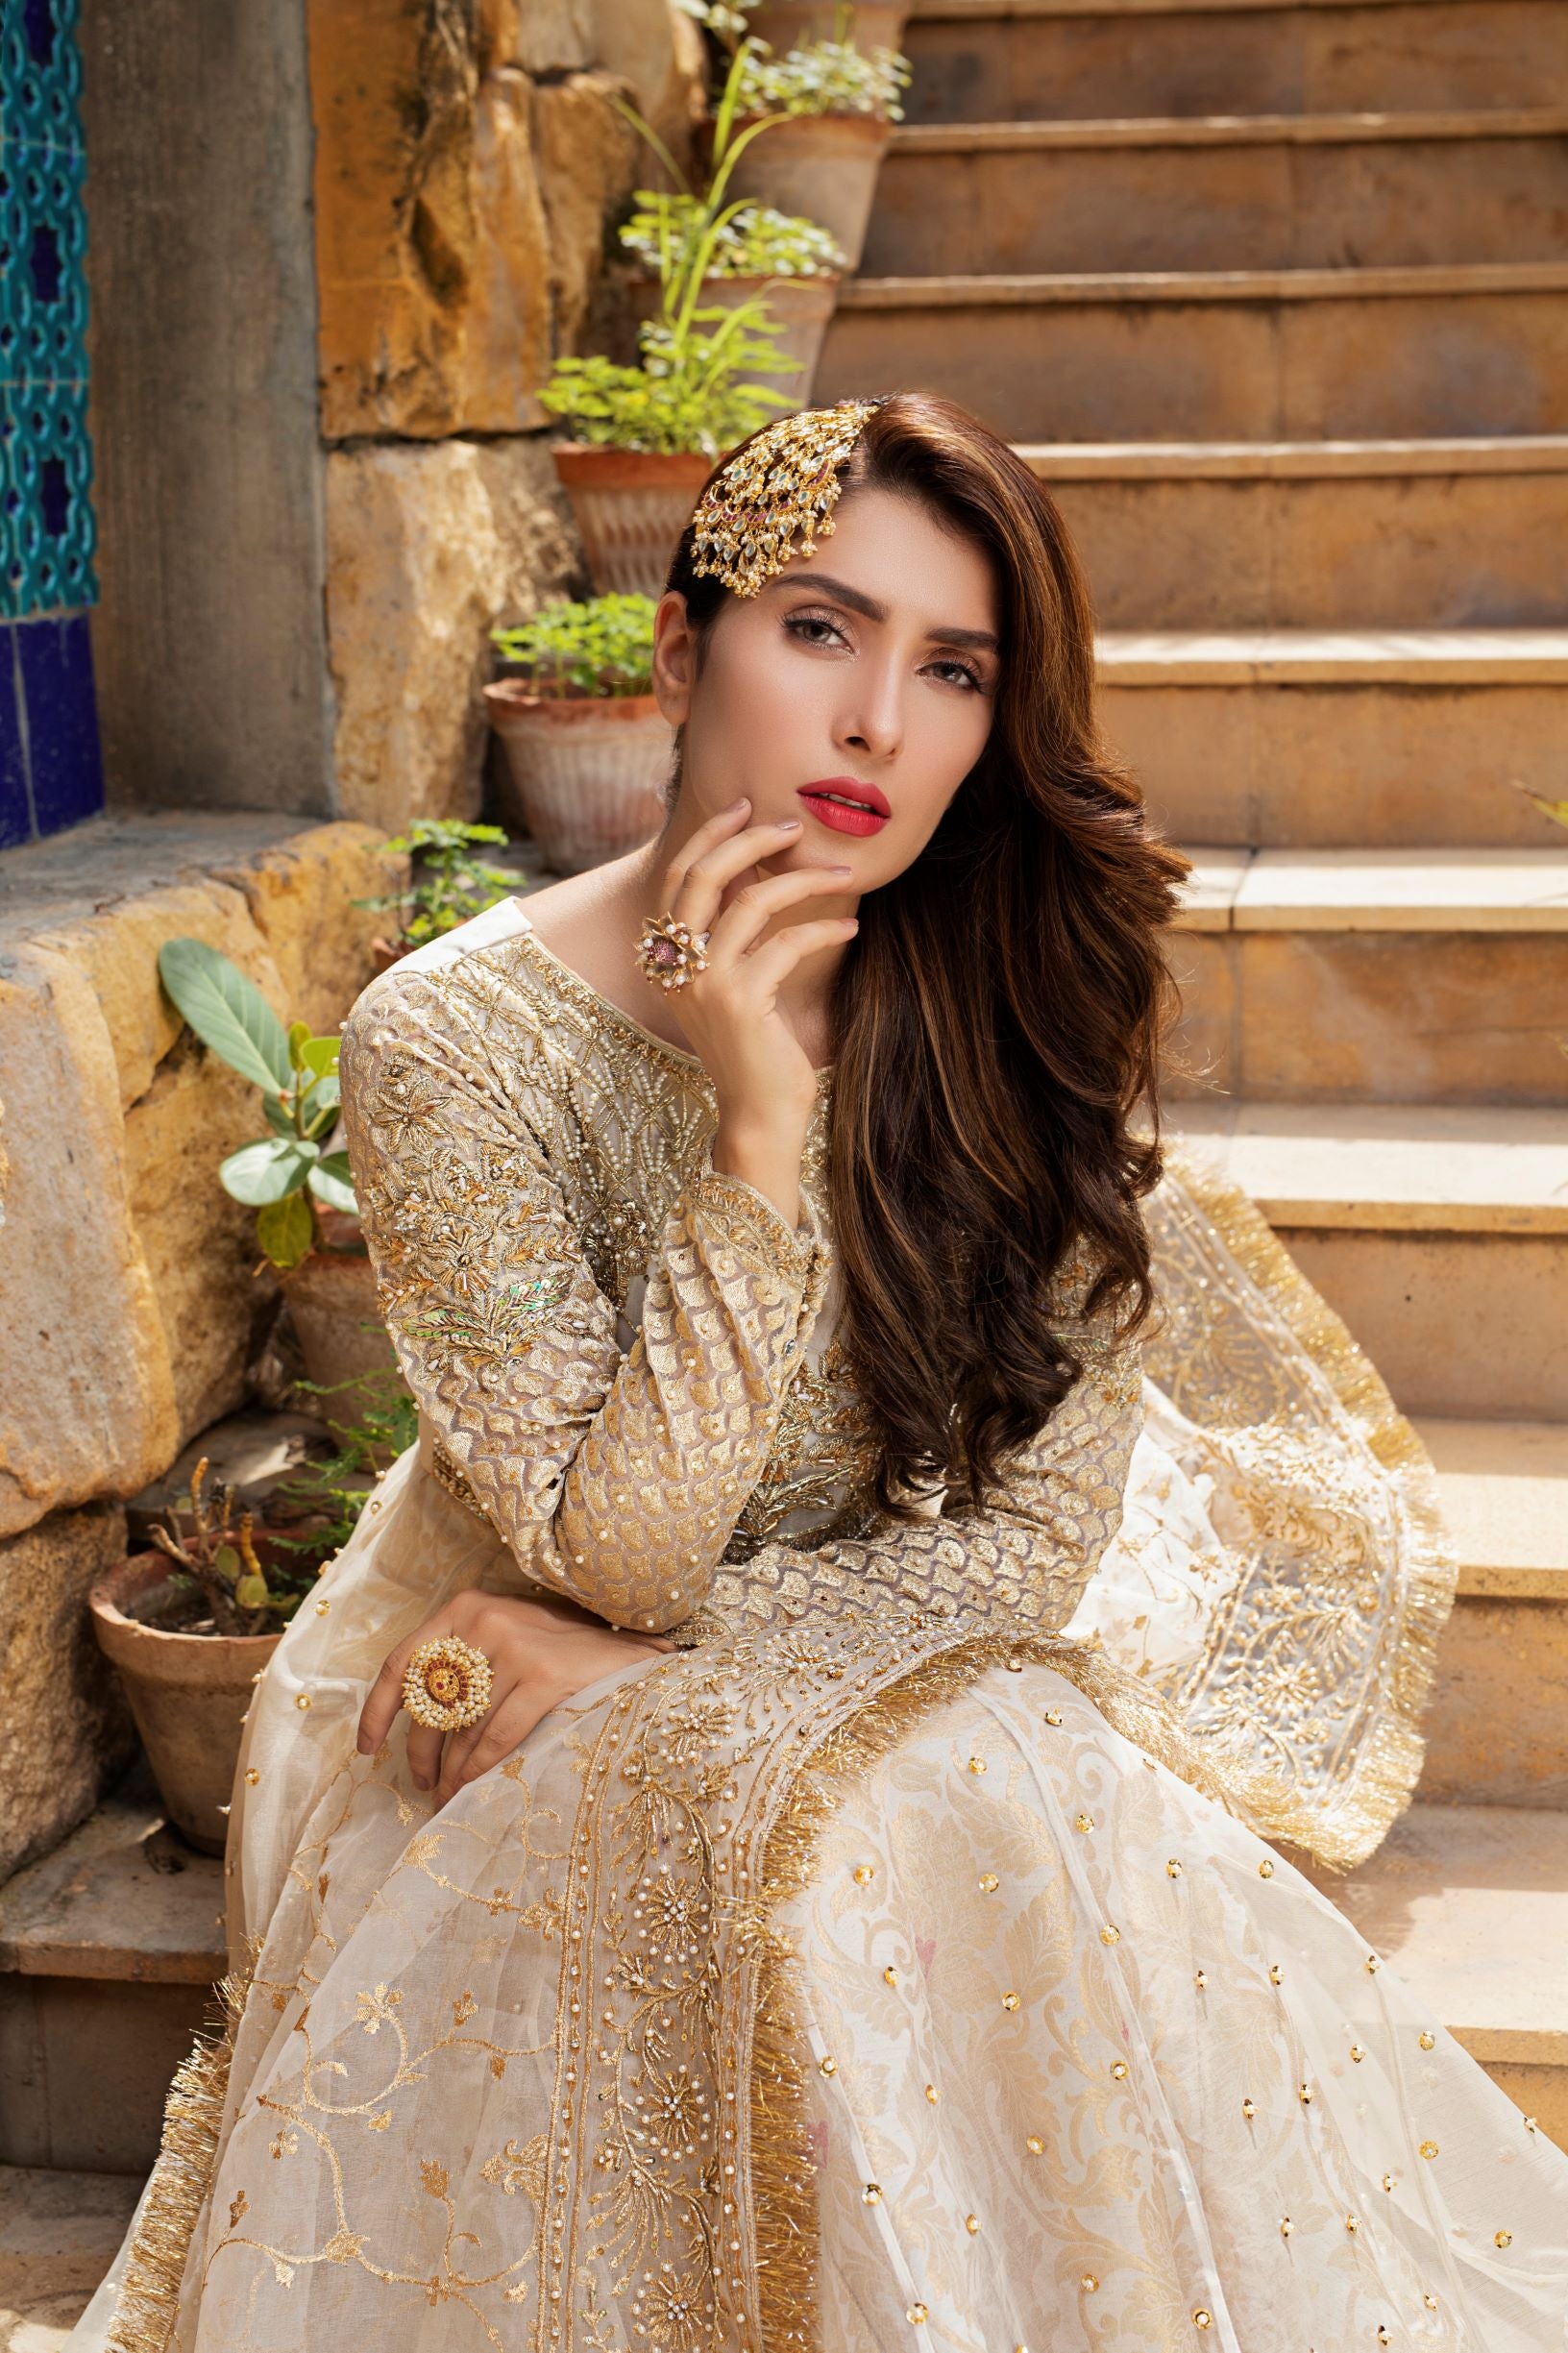 Engagement/ baraat/ valima outfit inspo for guests | Pakistani fashion  party wear, Pakistani formal dresses, Indian fashion dresses